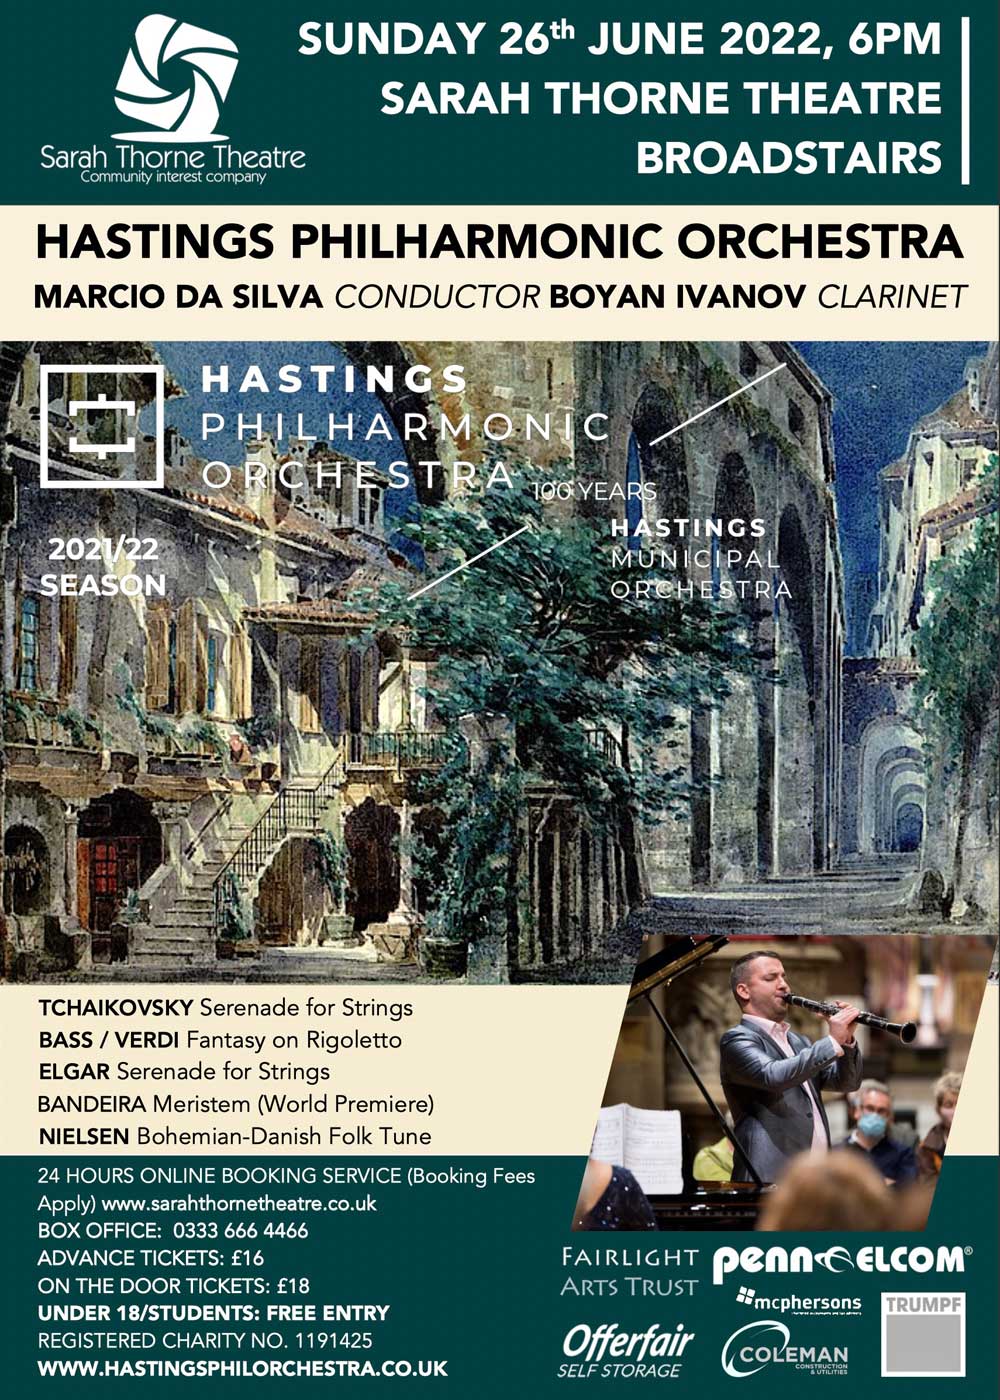 Image of Hastings Philharmonic Orchestra event poster